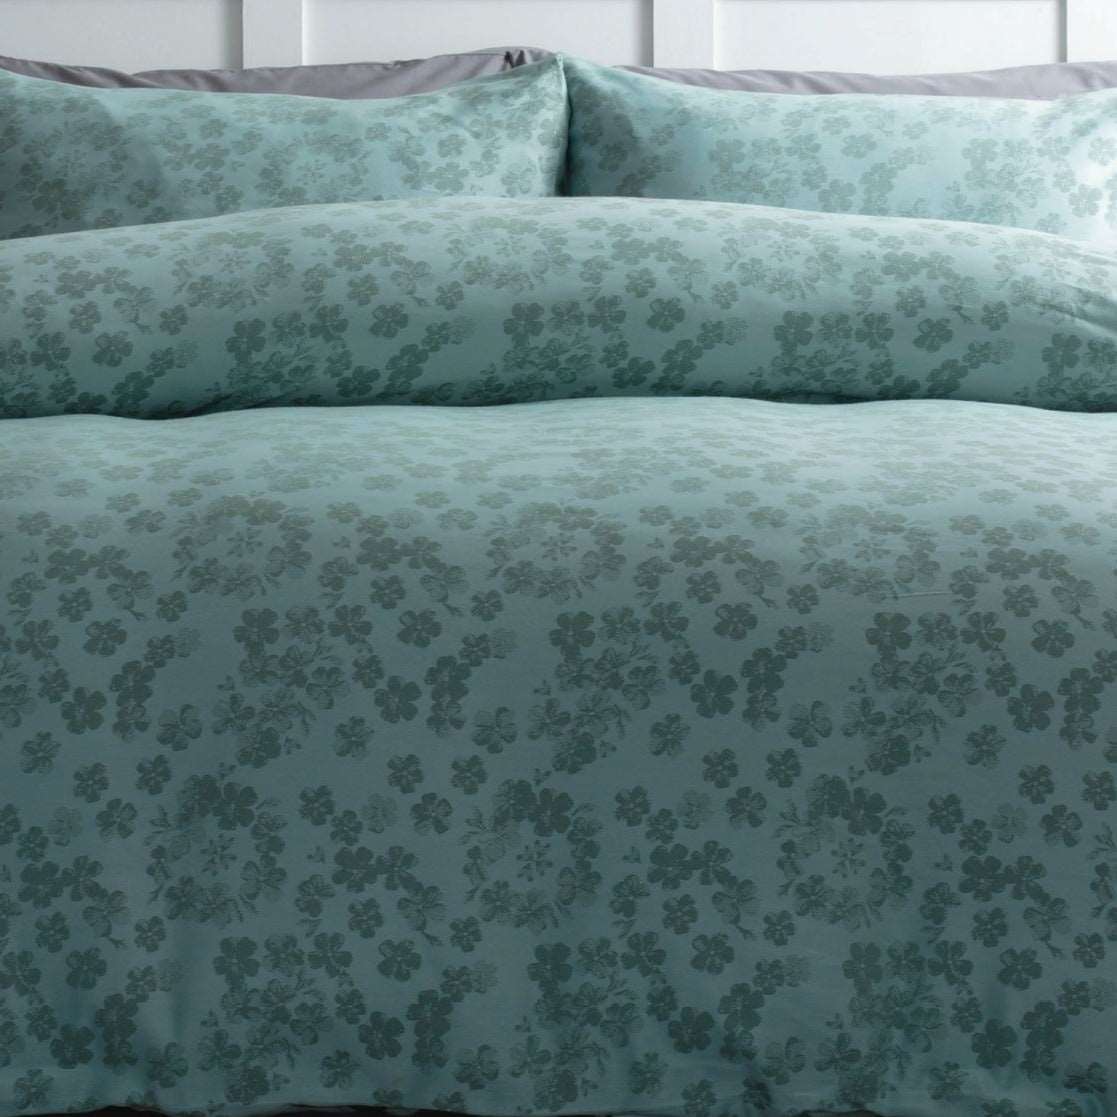 Belledorm Flora is a modern floral jacquard in a warm shade of duck egg green. The beauty of the design is in the simplicity of the pretty scattered petals.